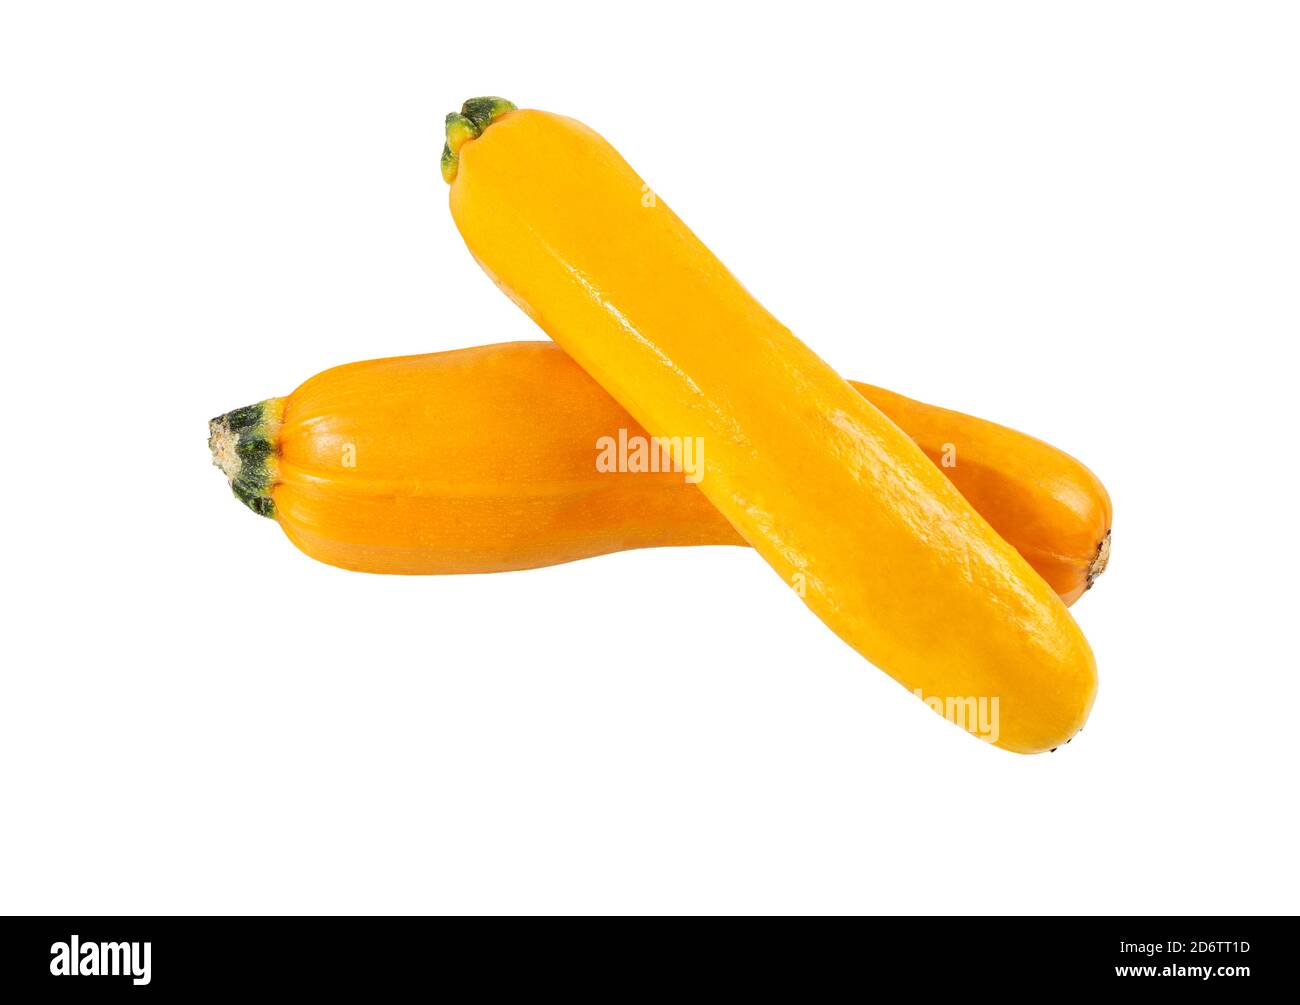 Zucchini or courgettes isolated on white background with clipping path. Isolated fresh squash. Stock Photo